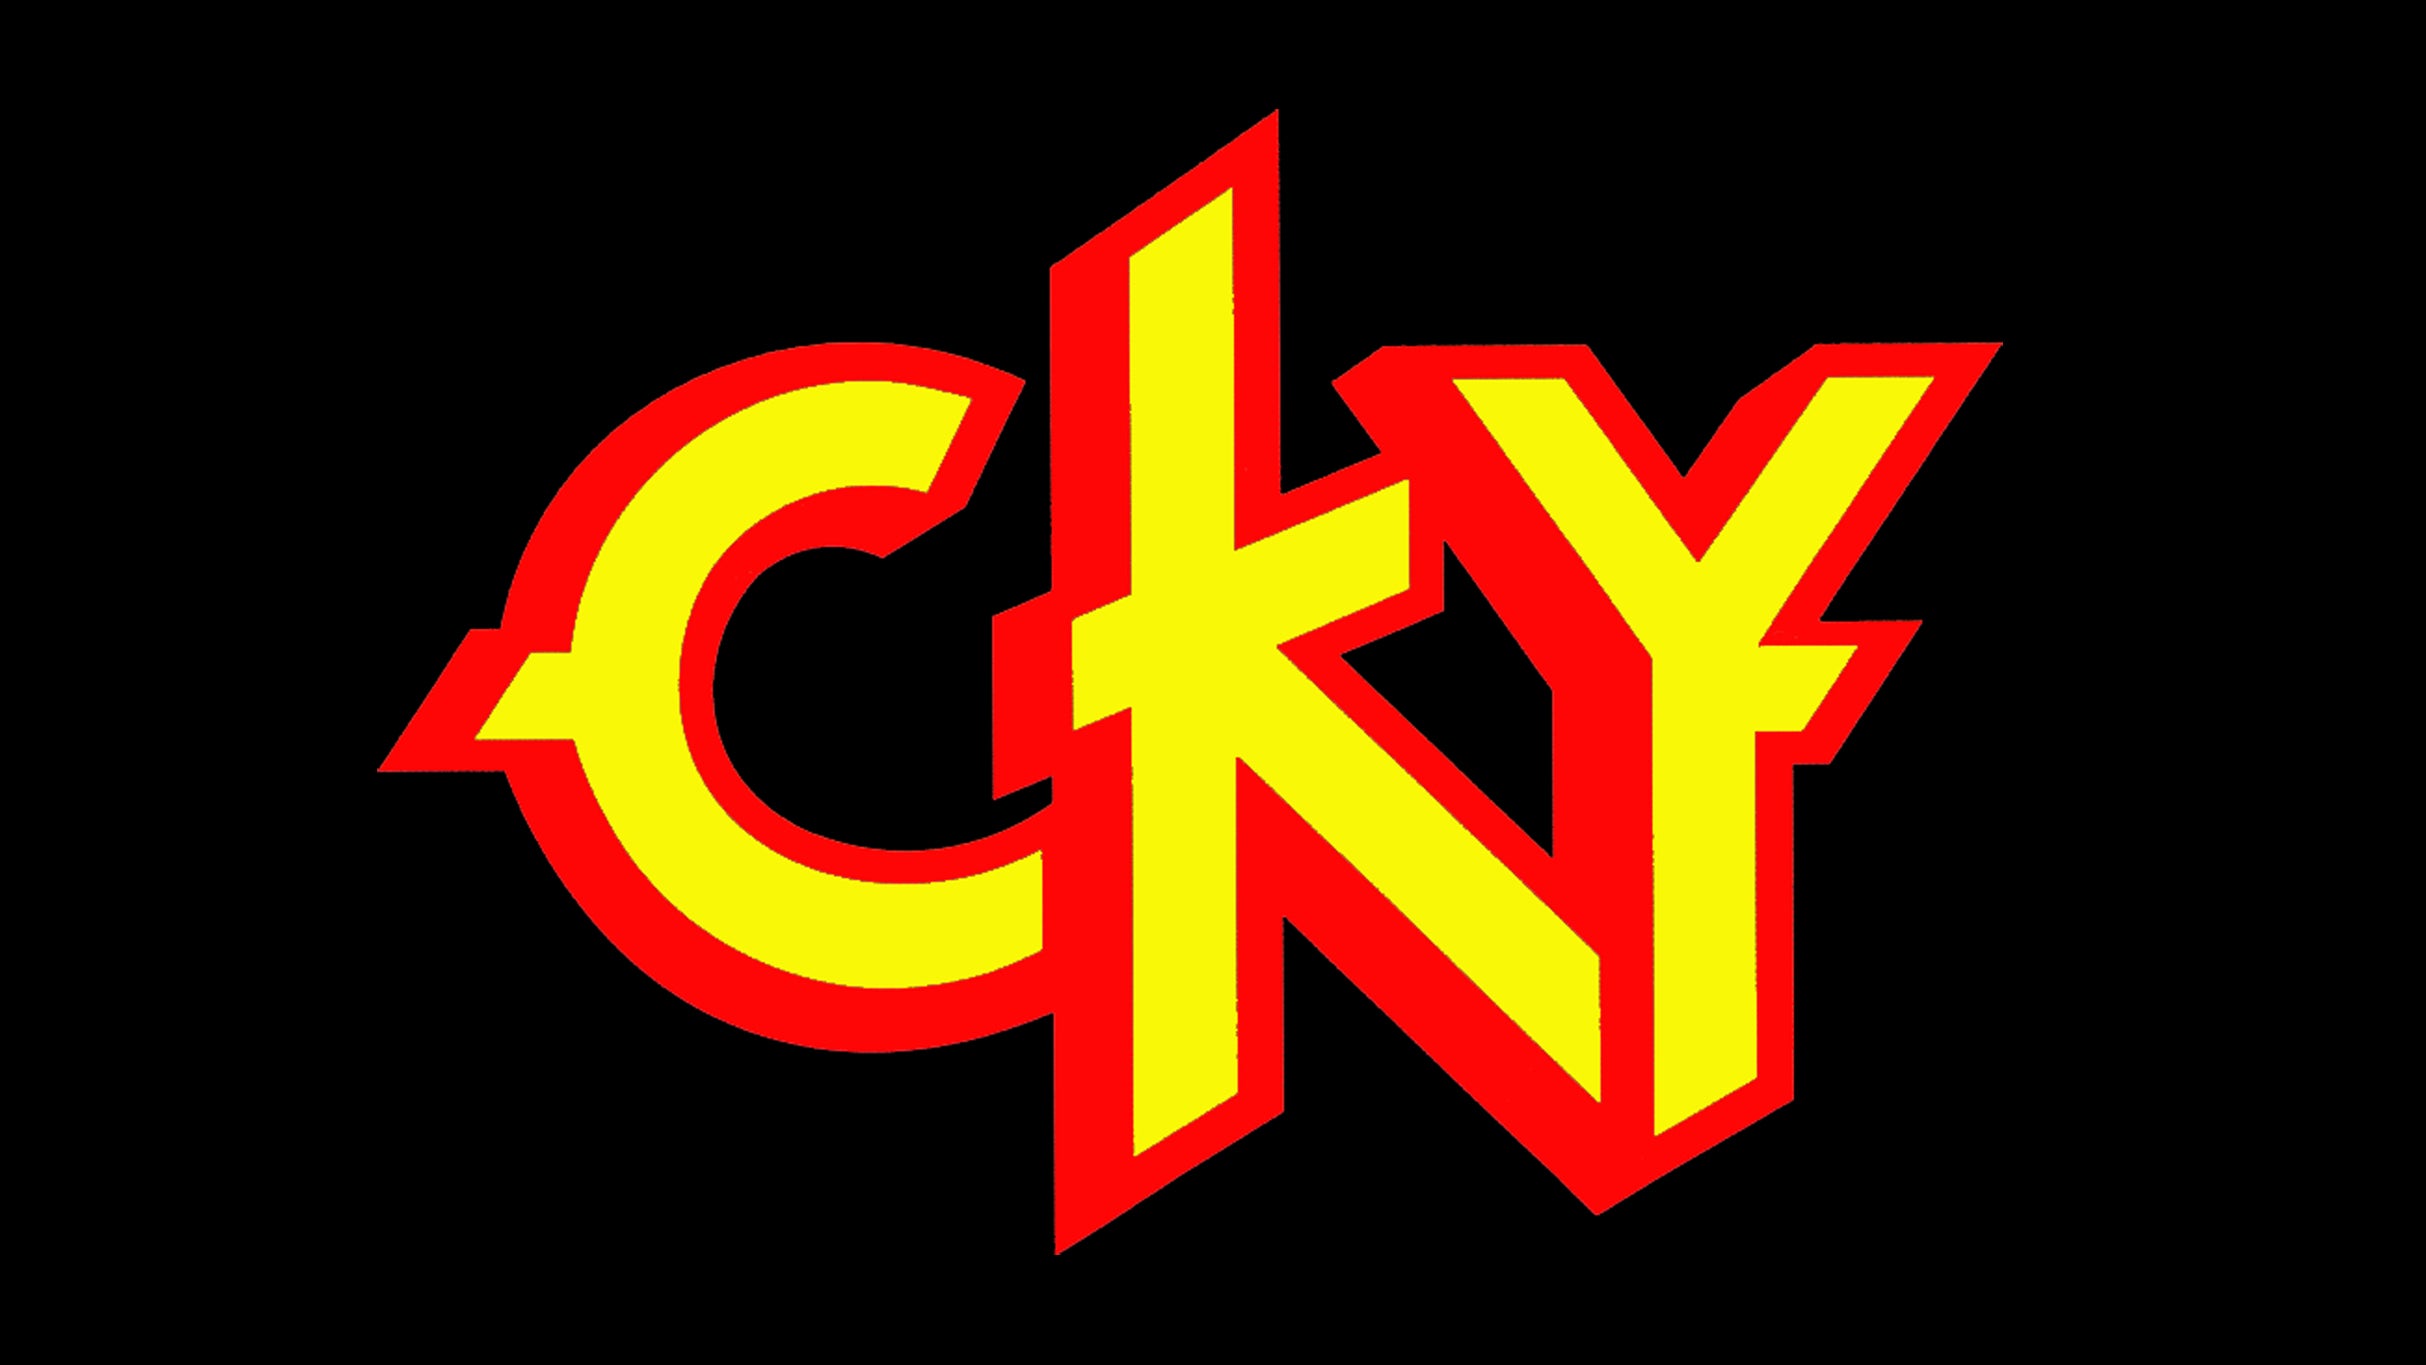 CKY presale code for your tickets in Hampton